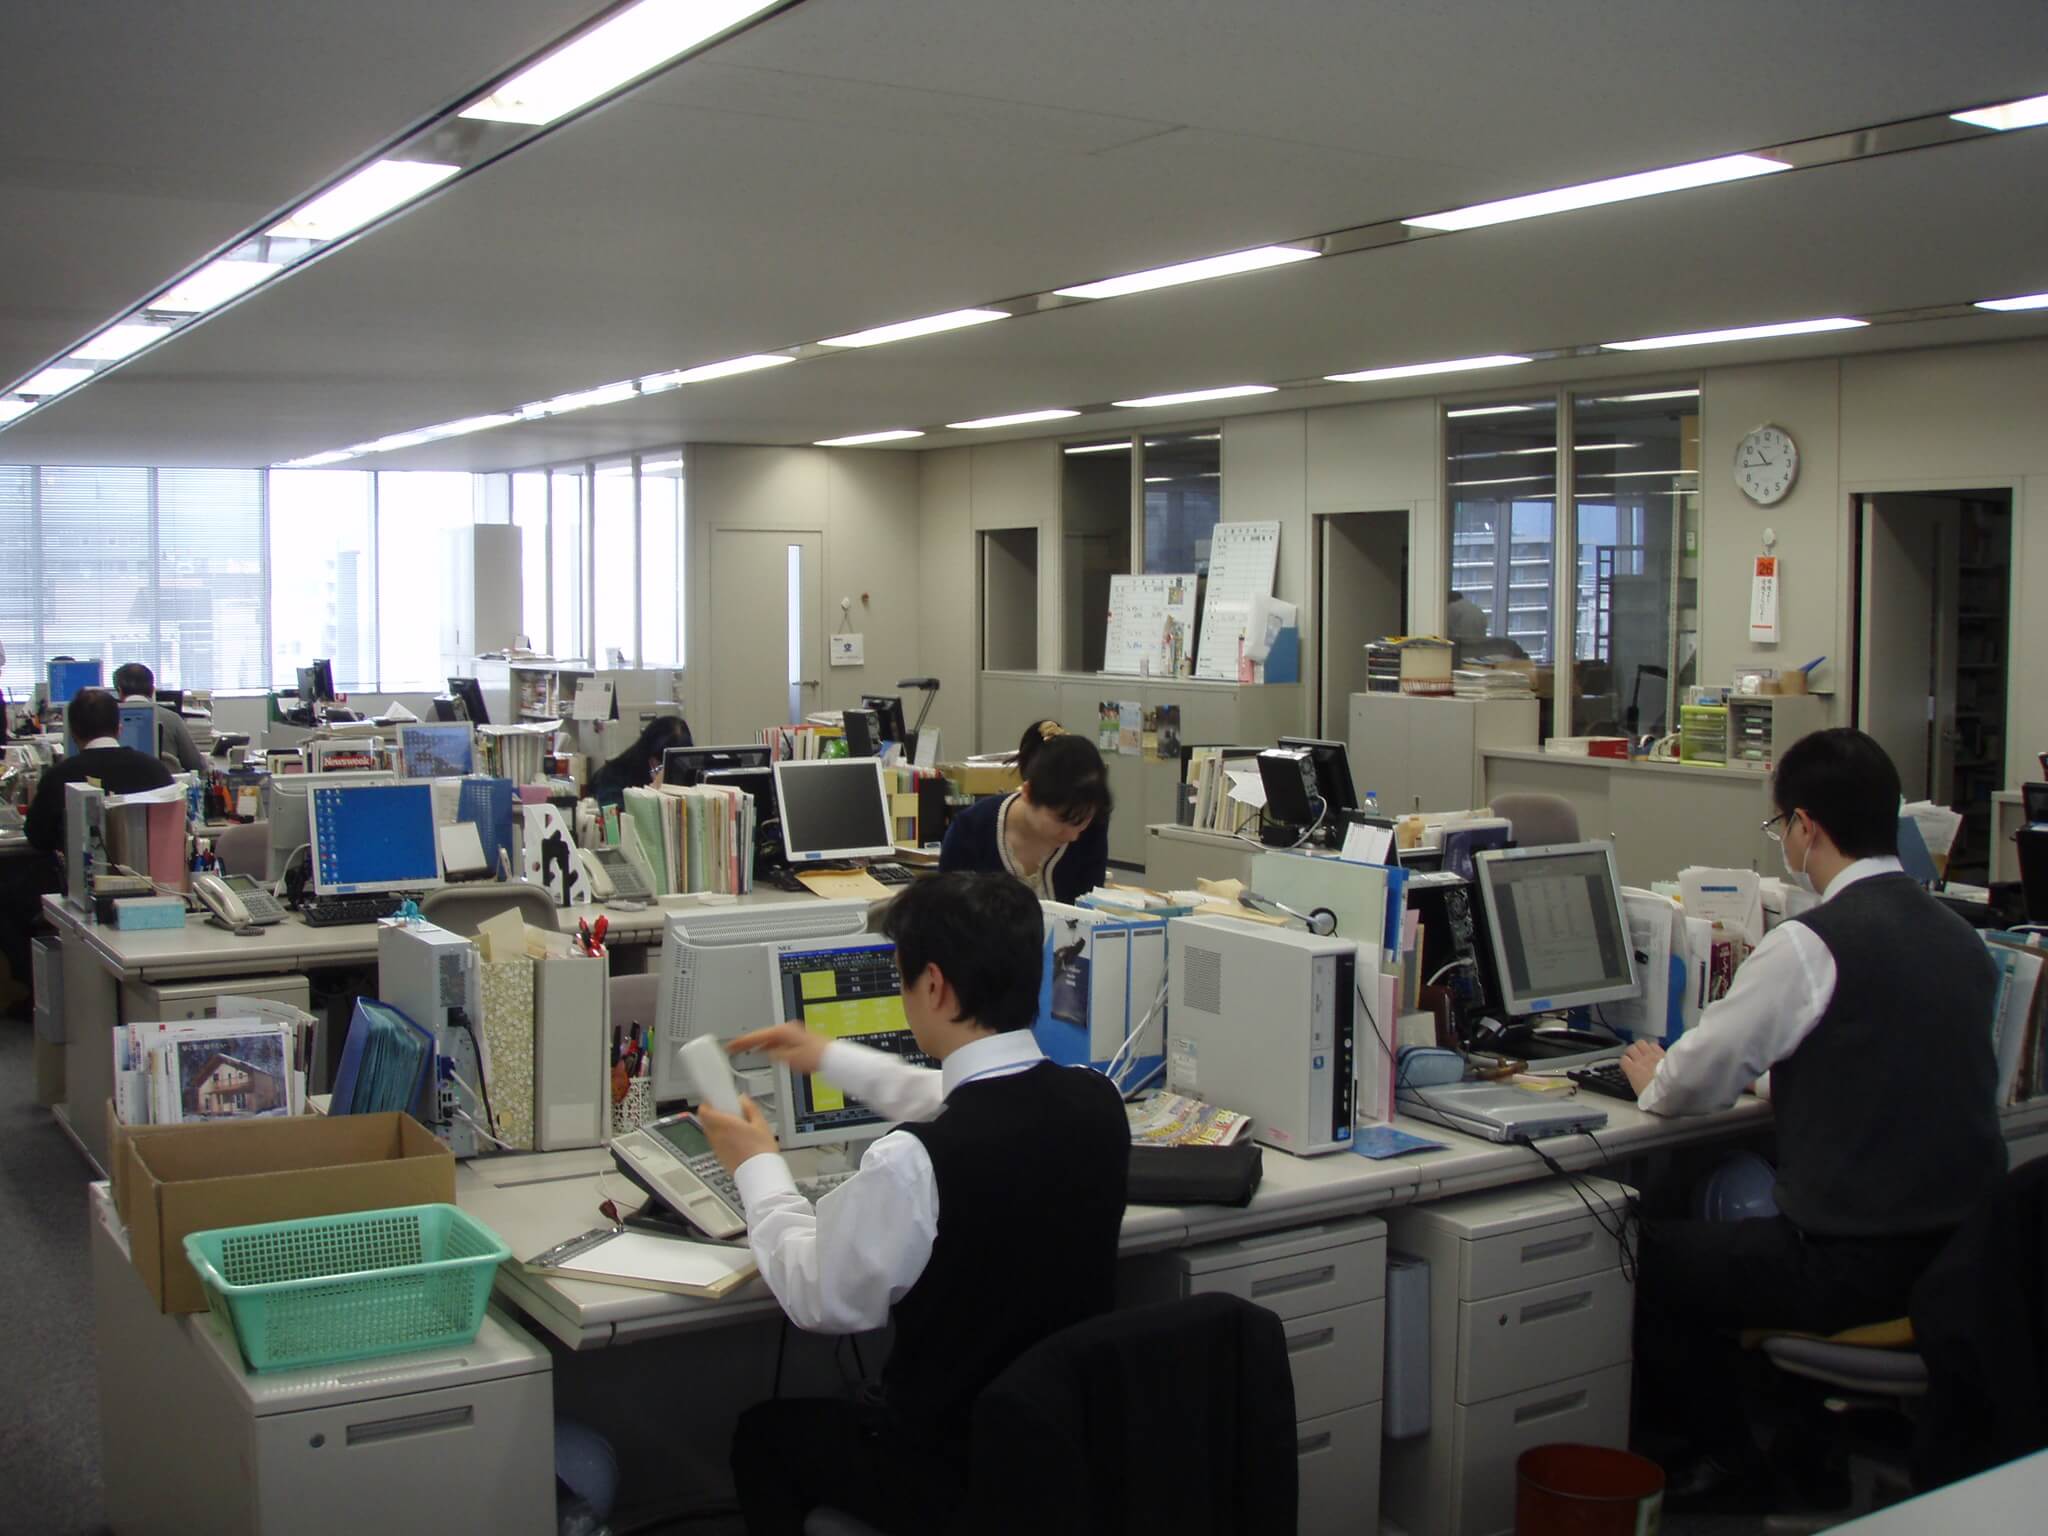 A-typical-Japanese-office-layout - MANABINK